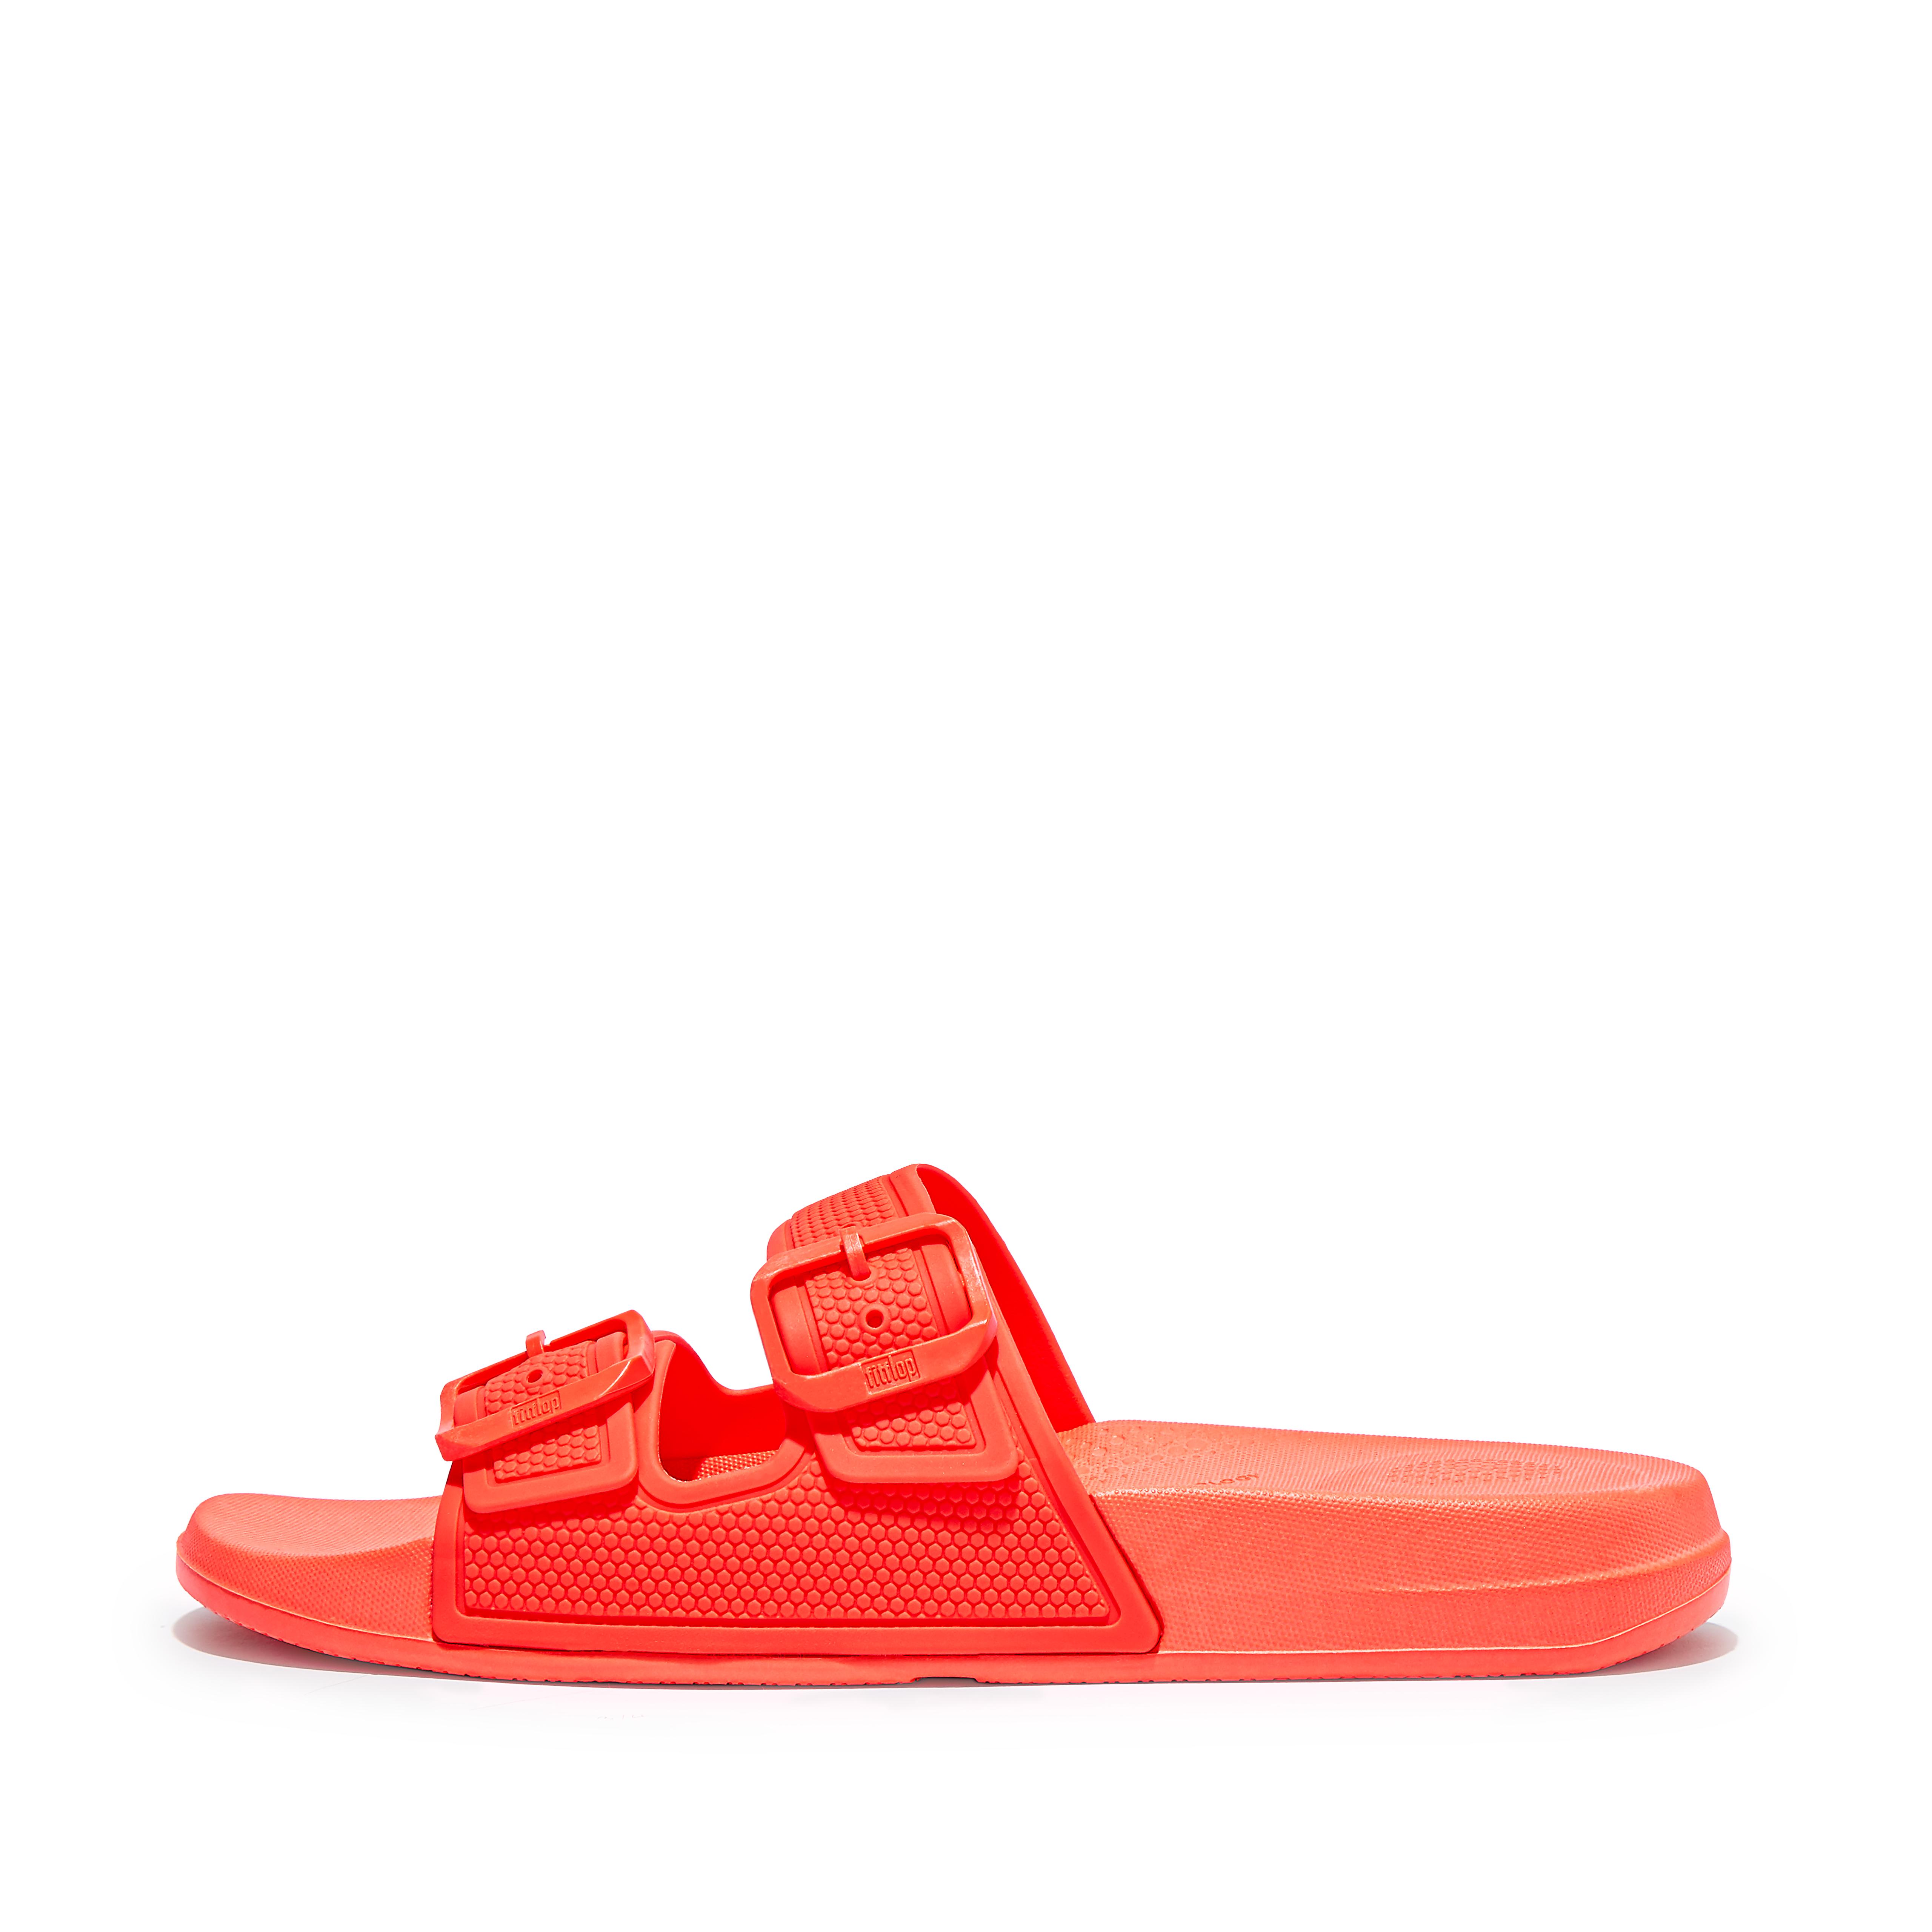 Fitflop Two-Bar Buckle Slides